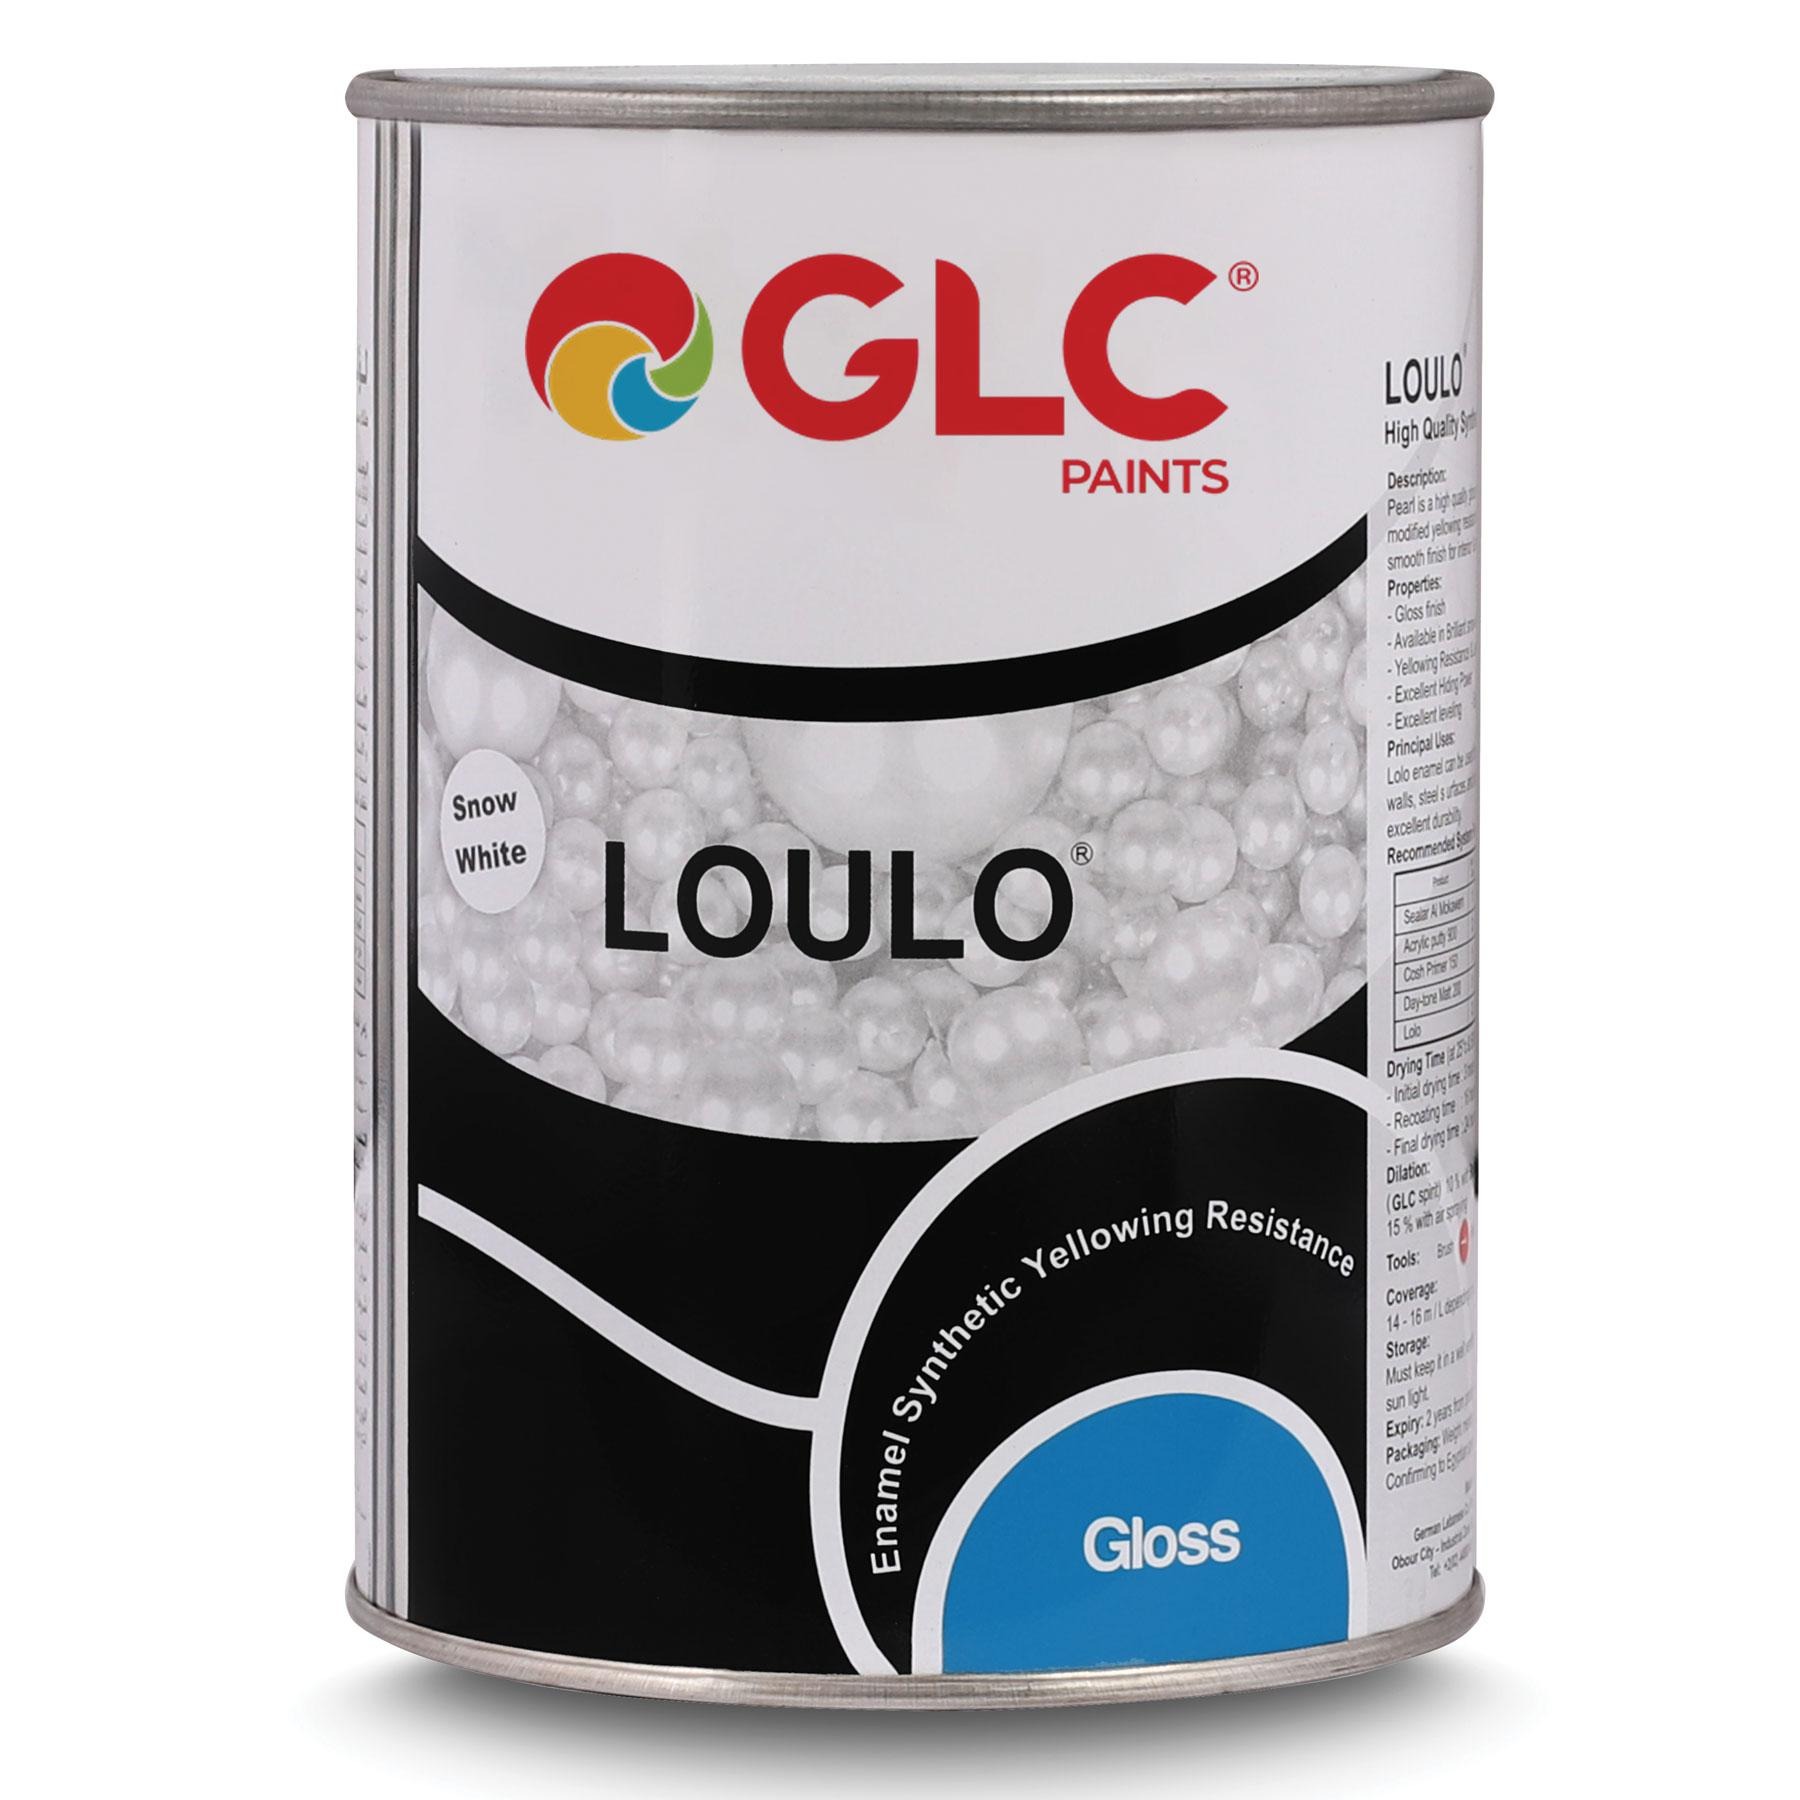 Loulo Painting - 2 Liter